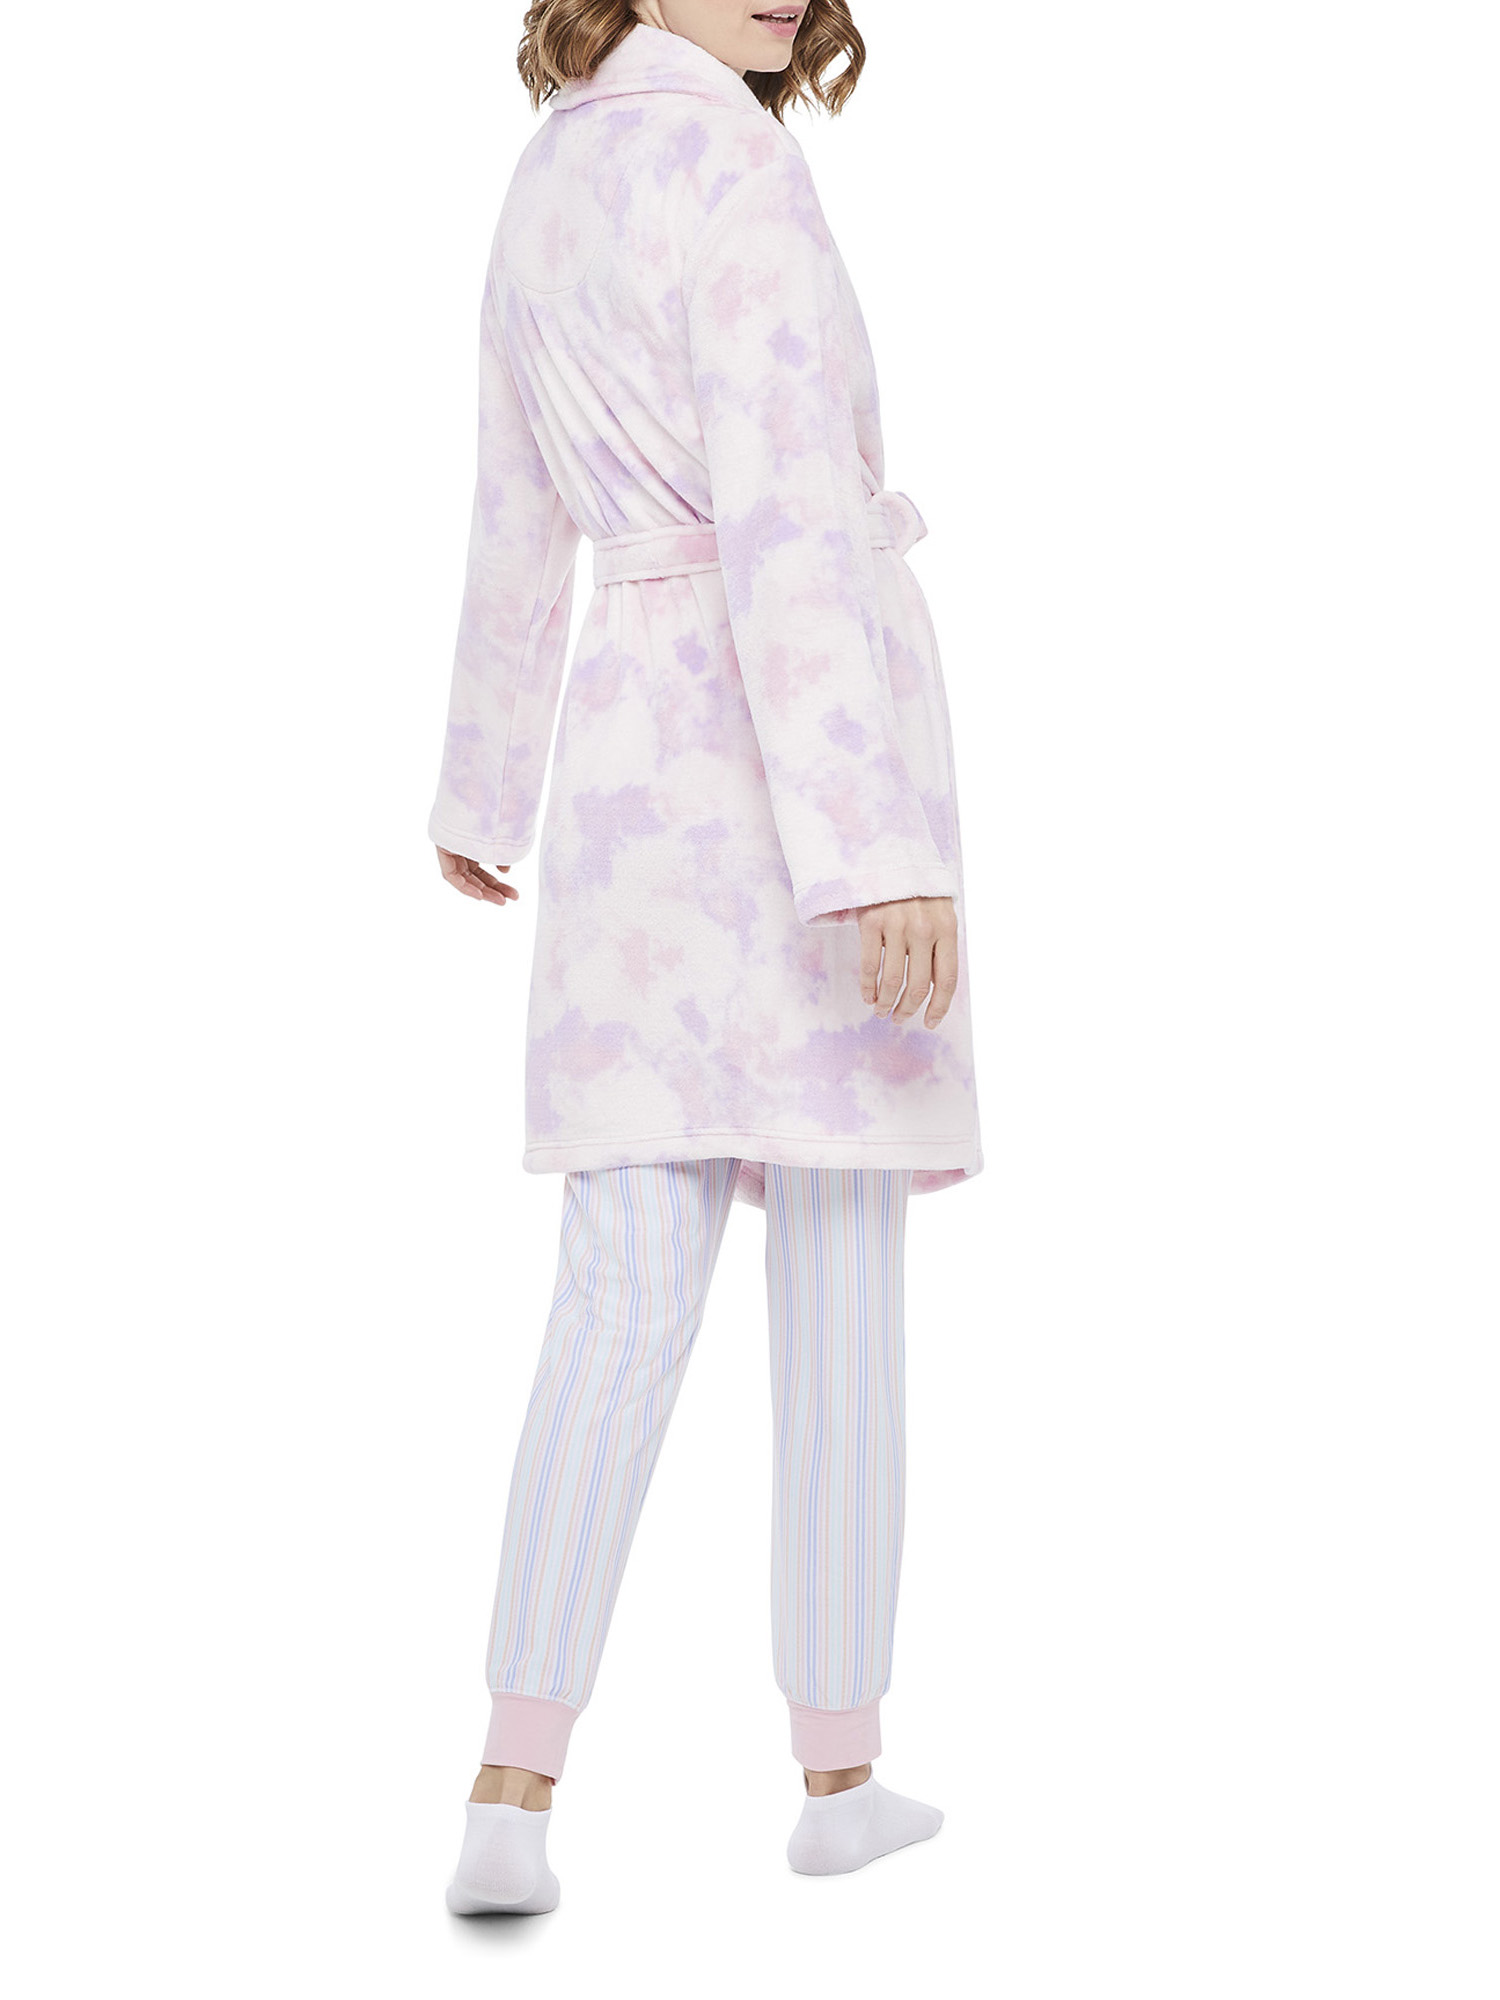 George Women's and Women's Plus Robe - image 2 of 6